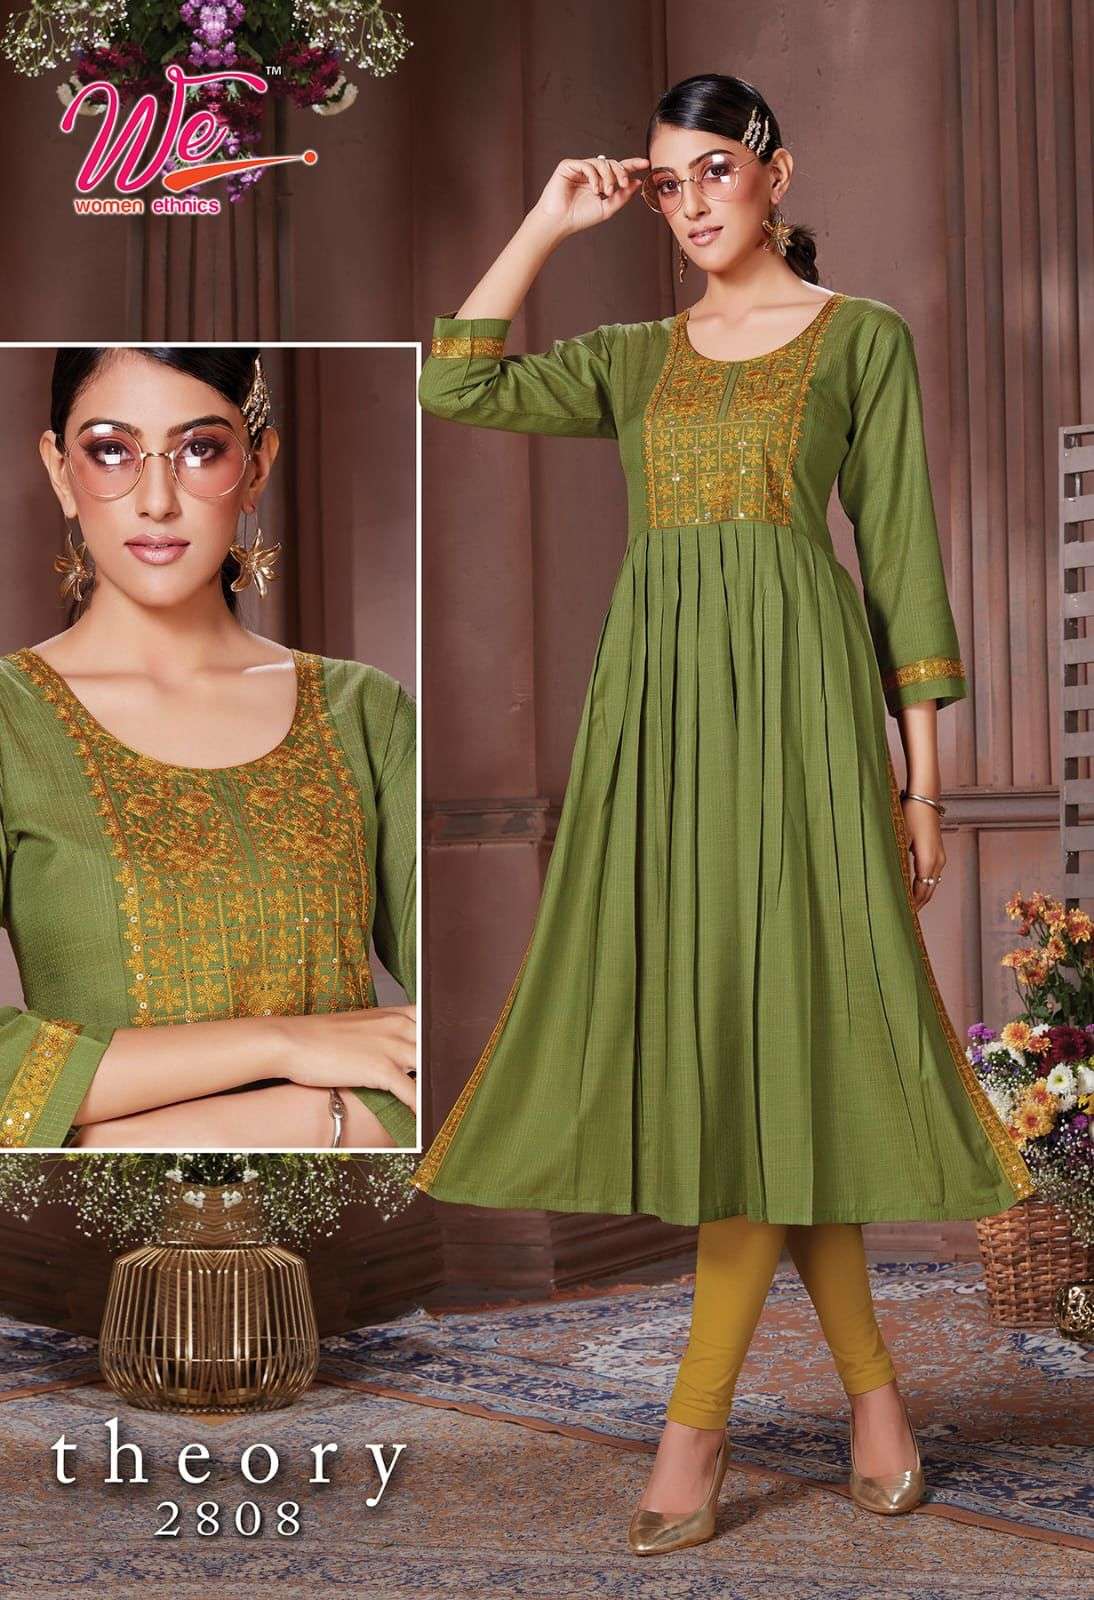 THEORY BY WOMEN ETHNIC 2801 TO 2808 SERIES DESIGNER STYLISH FANCY COLORFUL BEAUTIFUL PARTY WEAR & ETHNIC WEAR COLLECTION RAYON KURTIS AT WHOLESALE PRICE